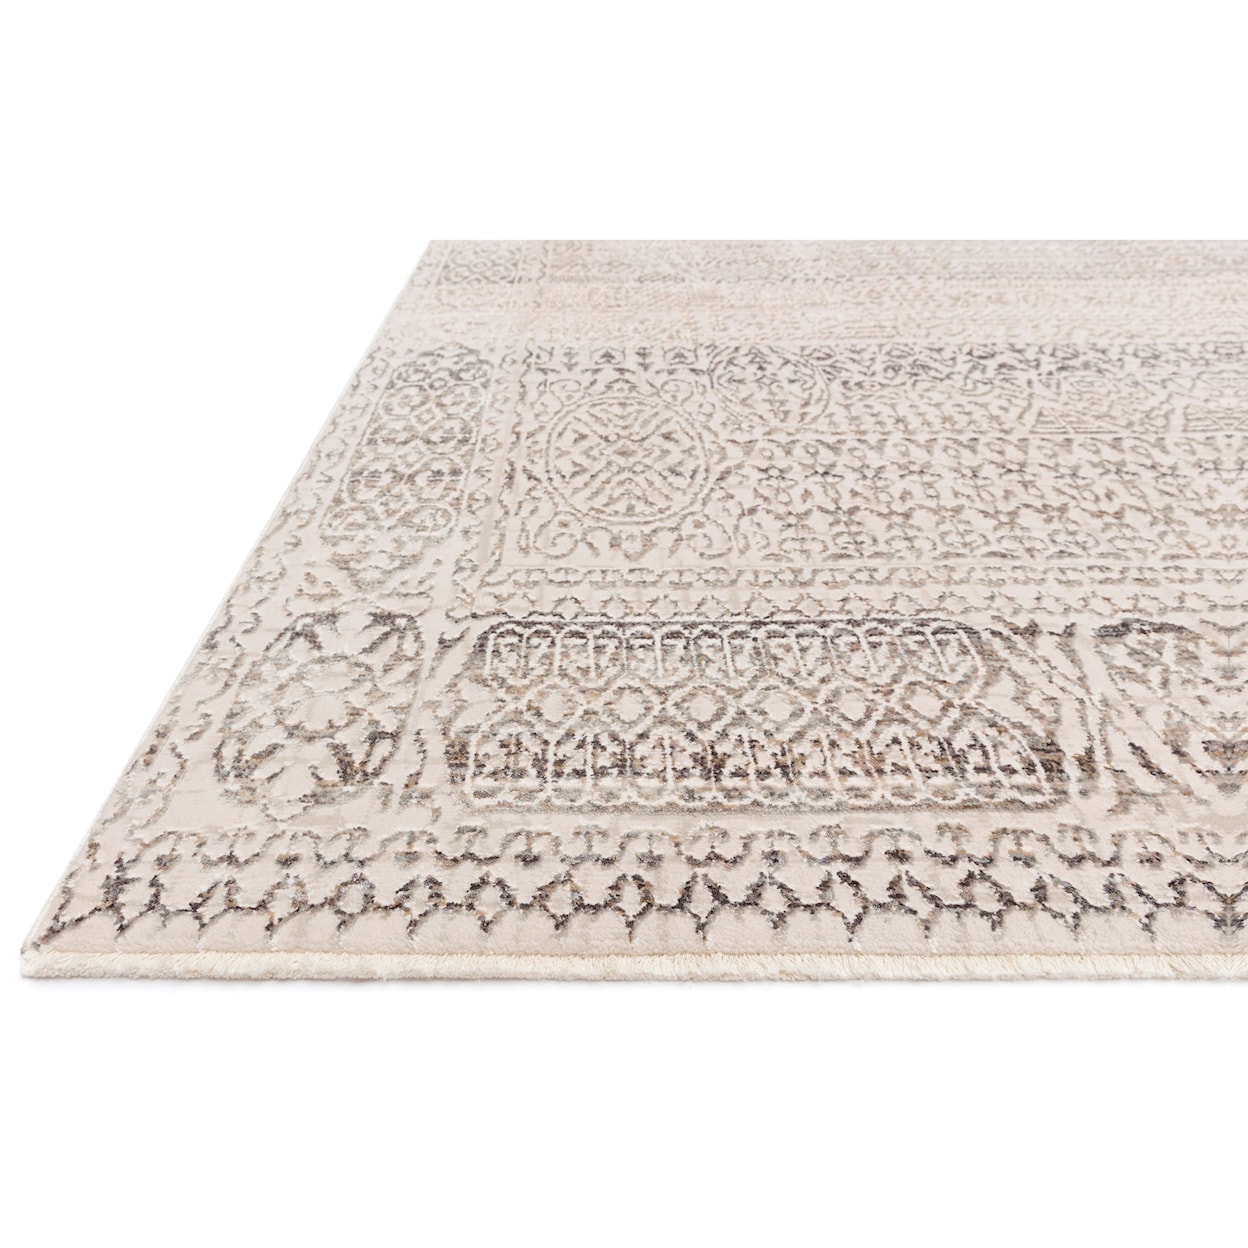 Loloi Rugs Homage 2'6" x 16'0" Ivory / Silver Rug